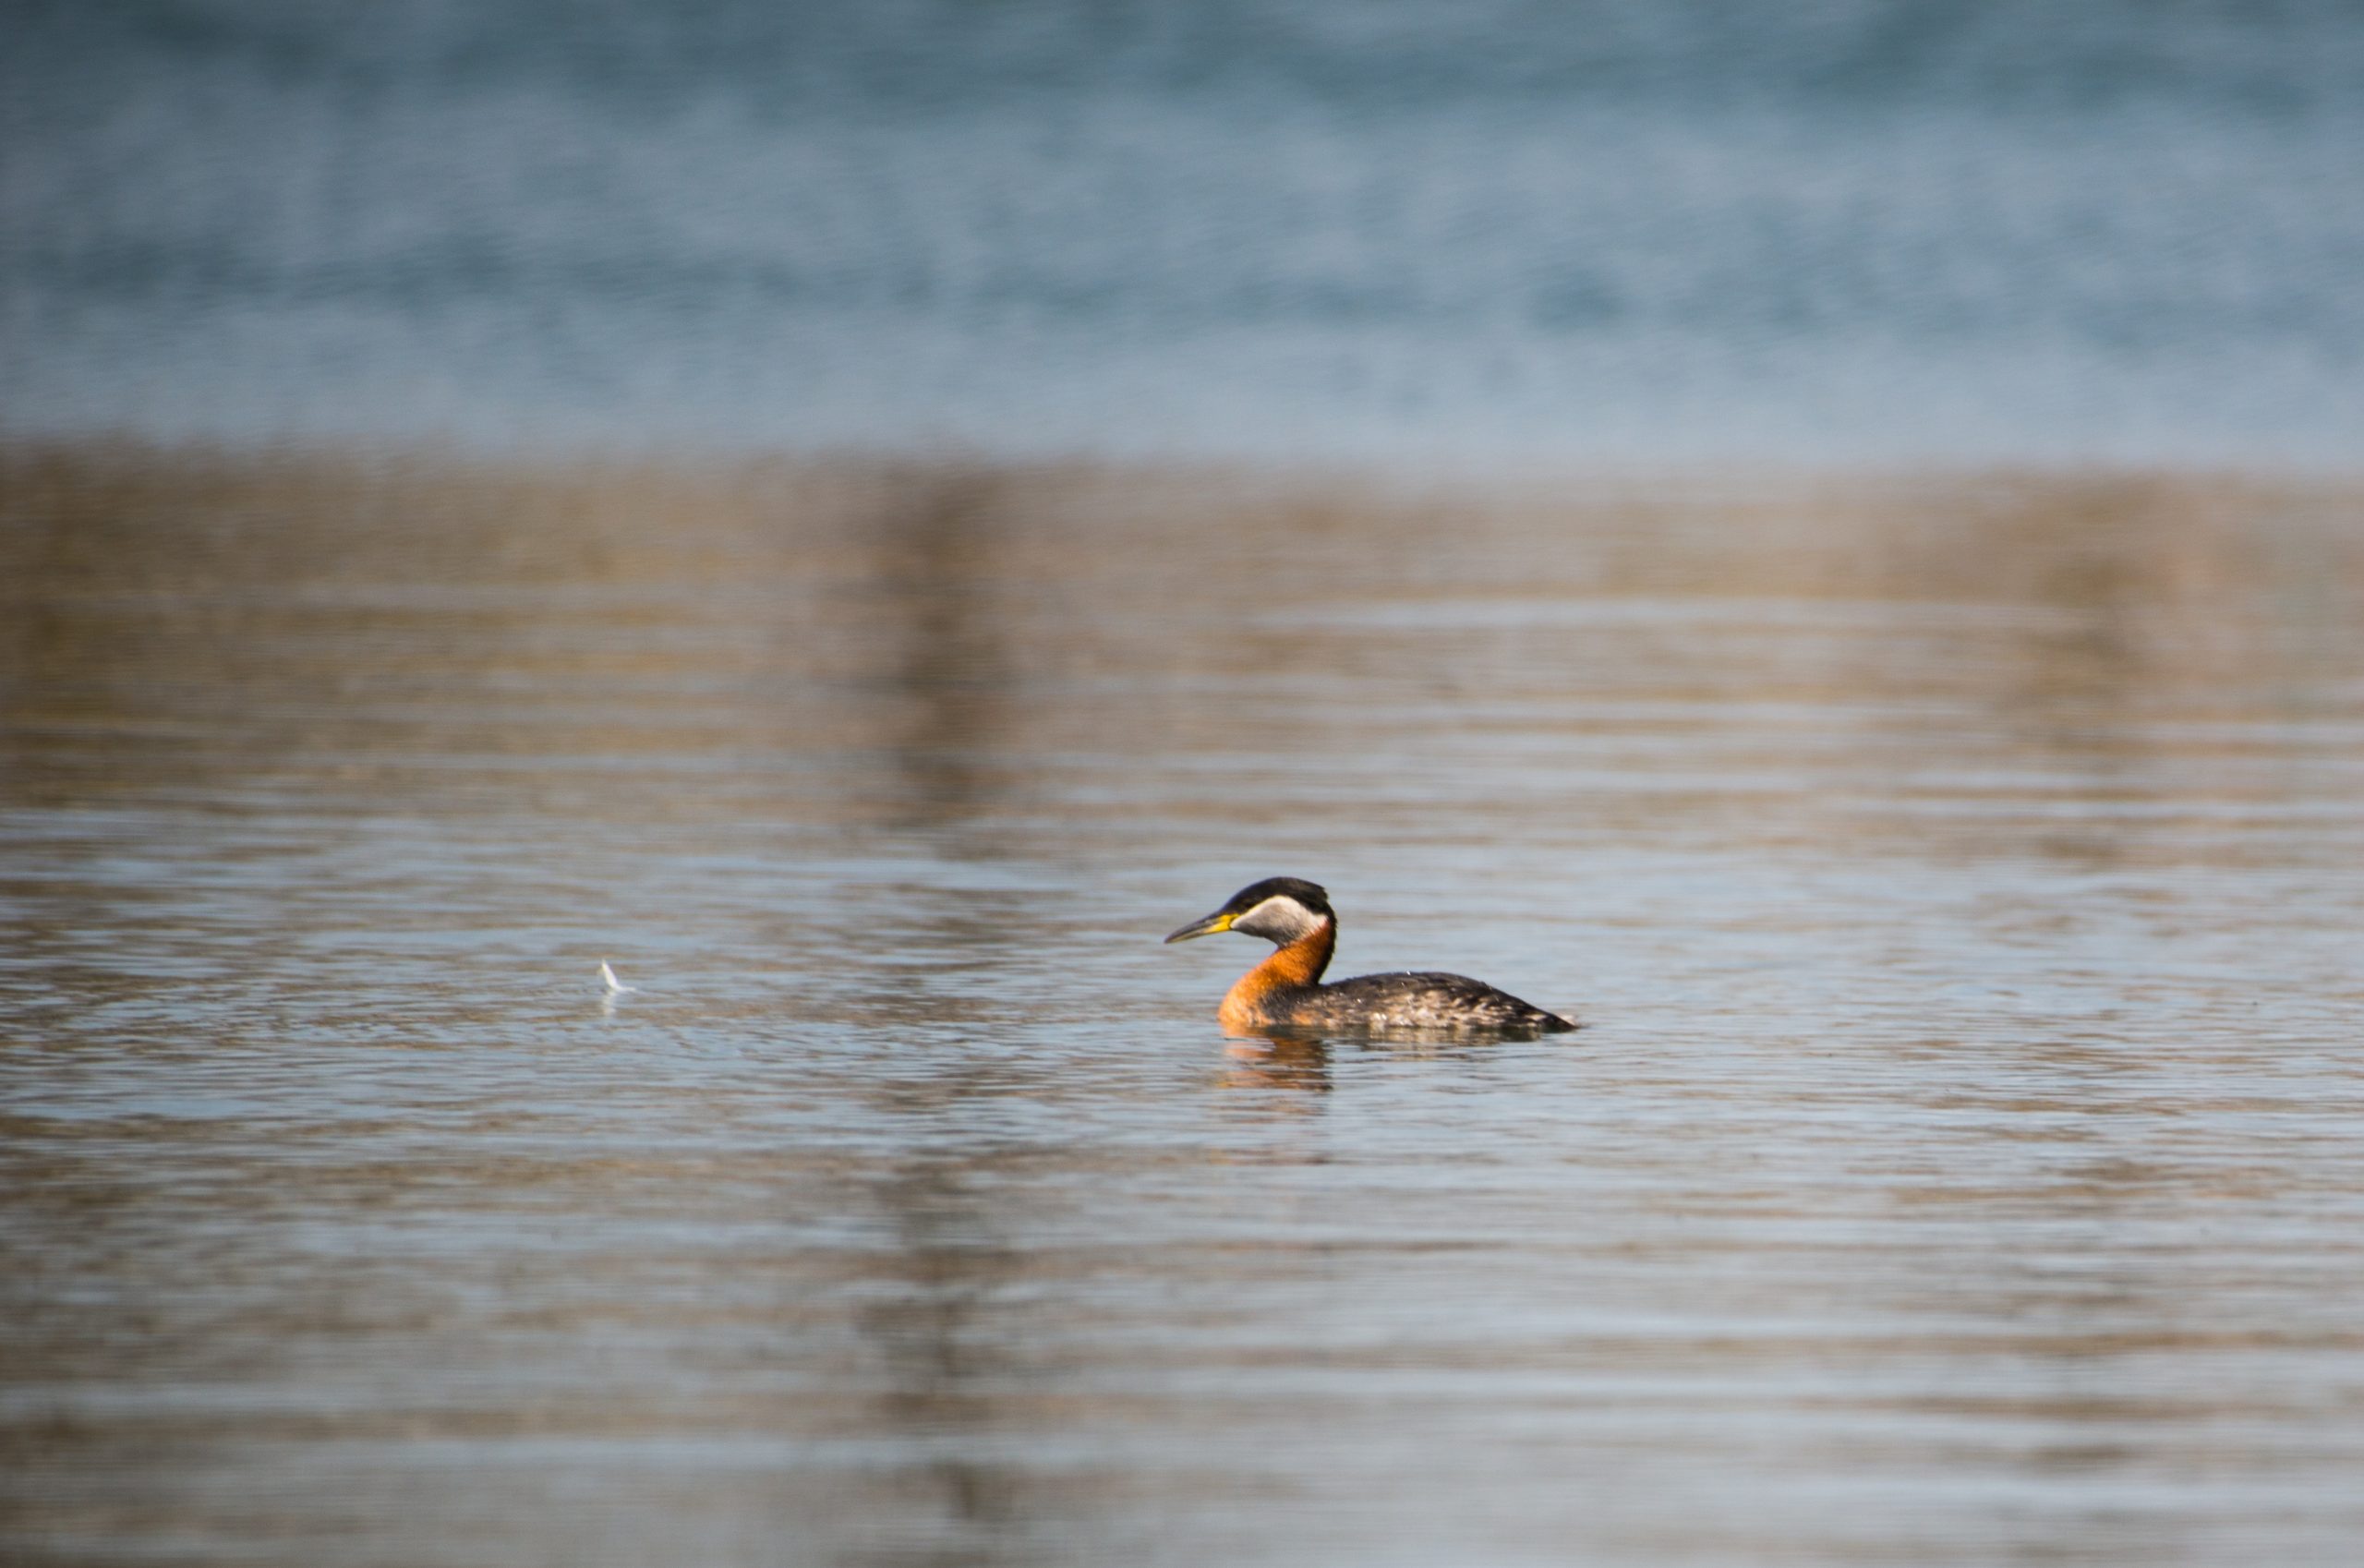 Red-necked Grebe, with red and white head and reddish orange neck, swimming in Lake Ontario in Colonel Sam Smith Park.